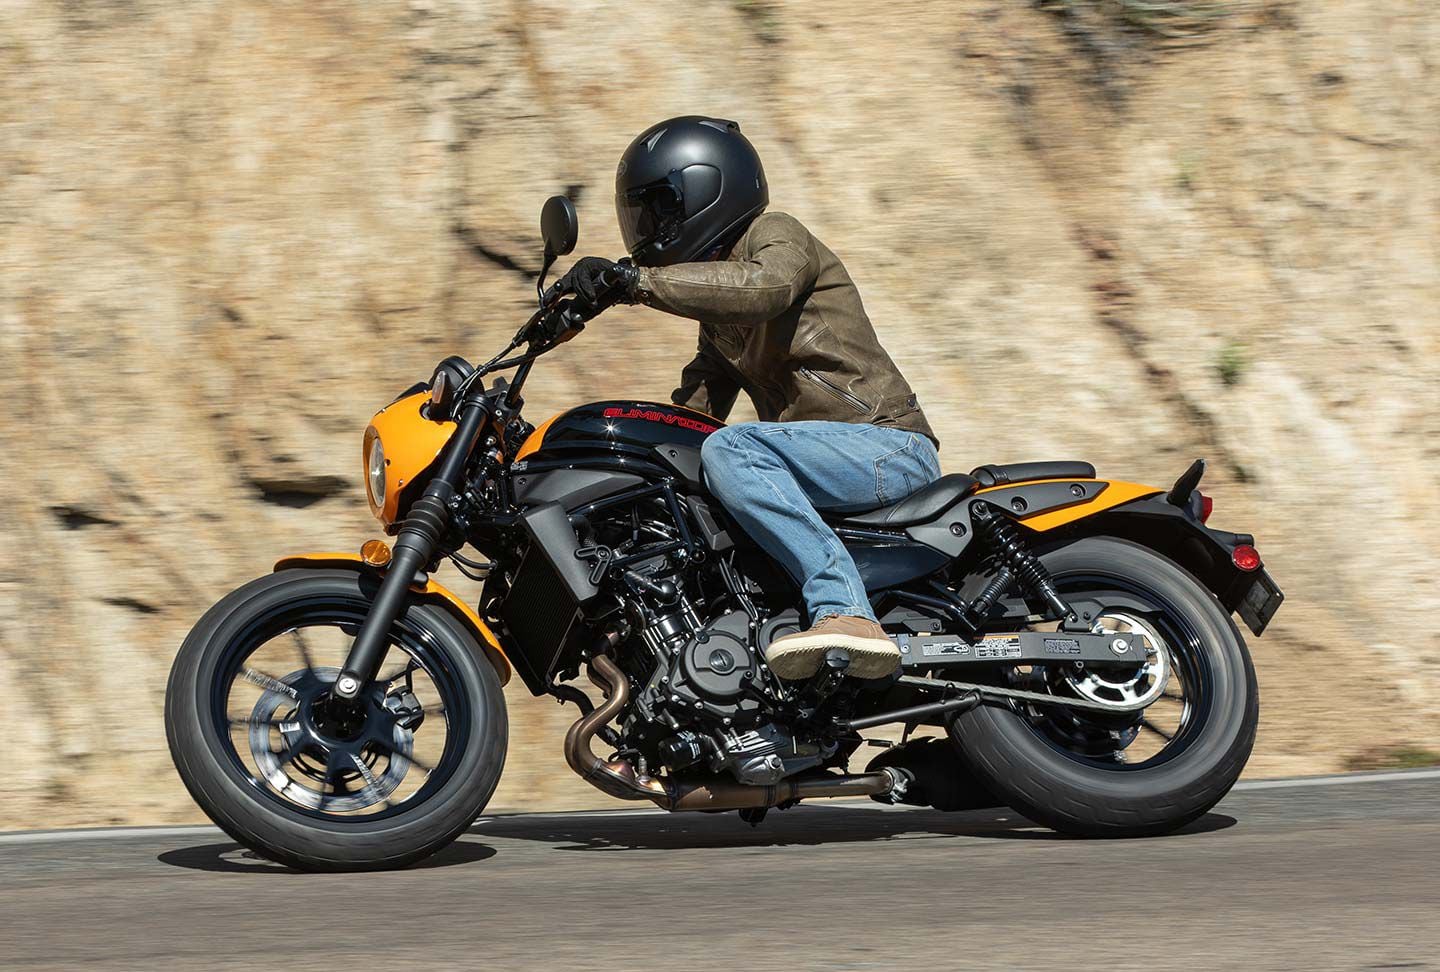 The Eliminator’s neutral riding position pays dividends in the twisties.